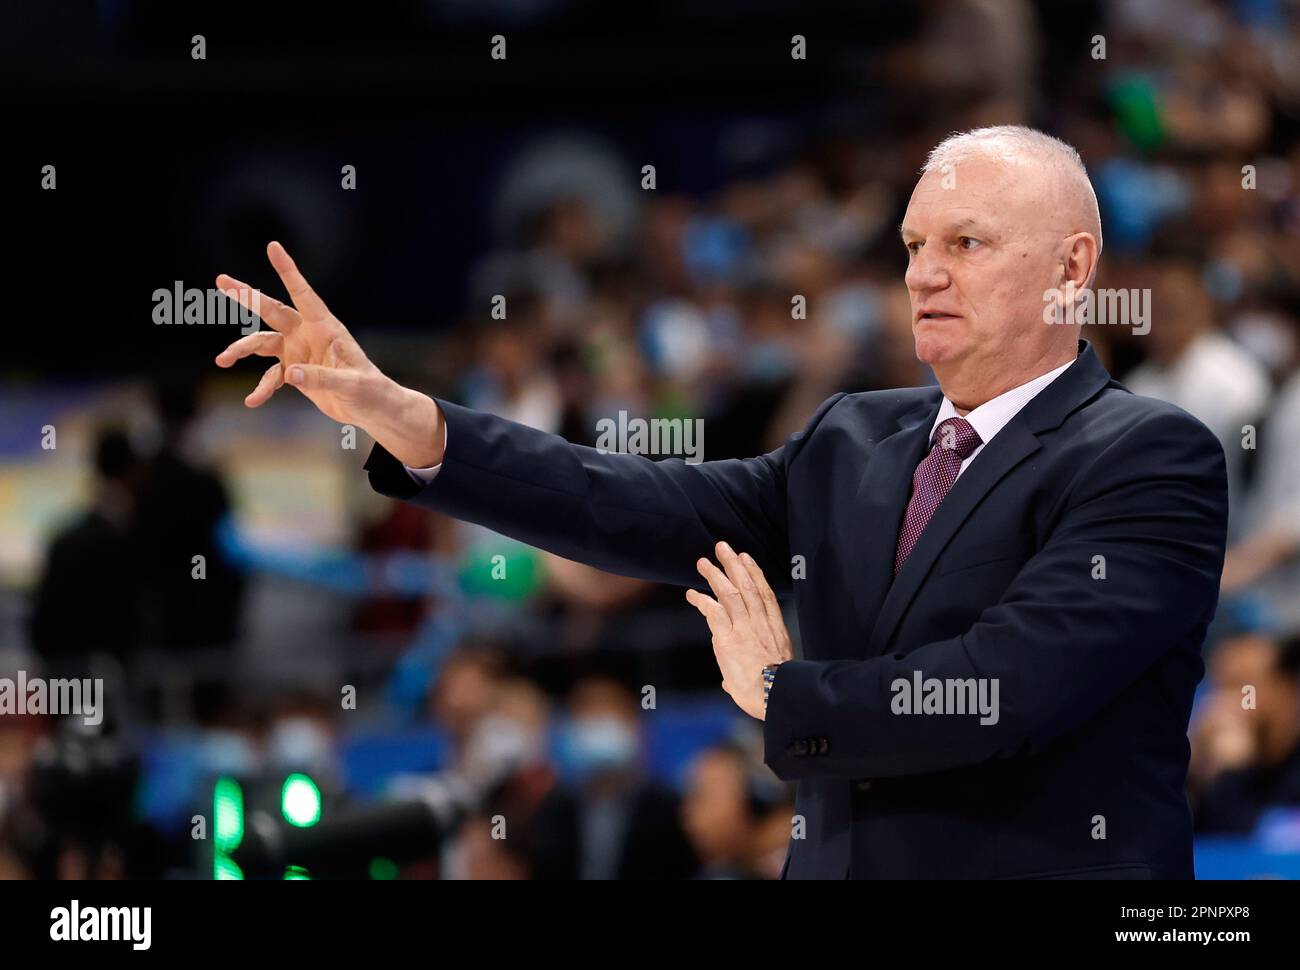 Beijing, China. 20th Apr, 2023. Ernest Raden, coach of Beijing Ducks, gestures during the Game 2 of the best-of-three quarterfinals between Beijing Ducks and the Liaoning Flying Leopards at the playoffs of 2022-2023 season of the Chinese Basketball Association (CBA) league in Beijing, capital of China, April 20, 2023. Credit: Wang Lili/Xinhua/Alamy Live News Stock Photo